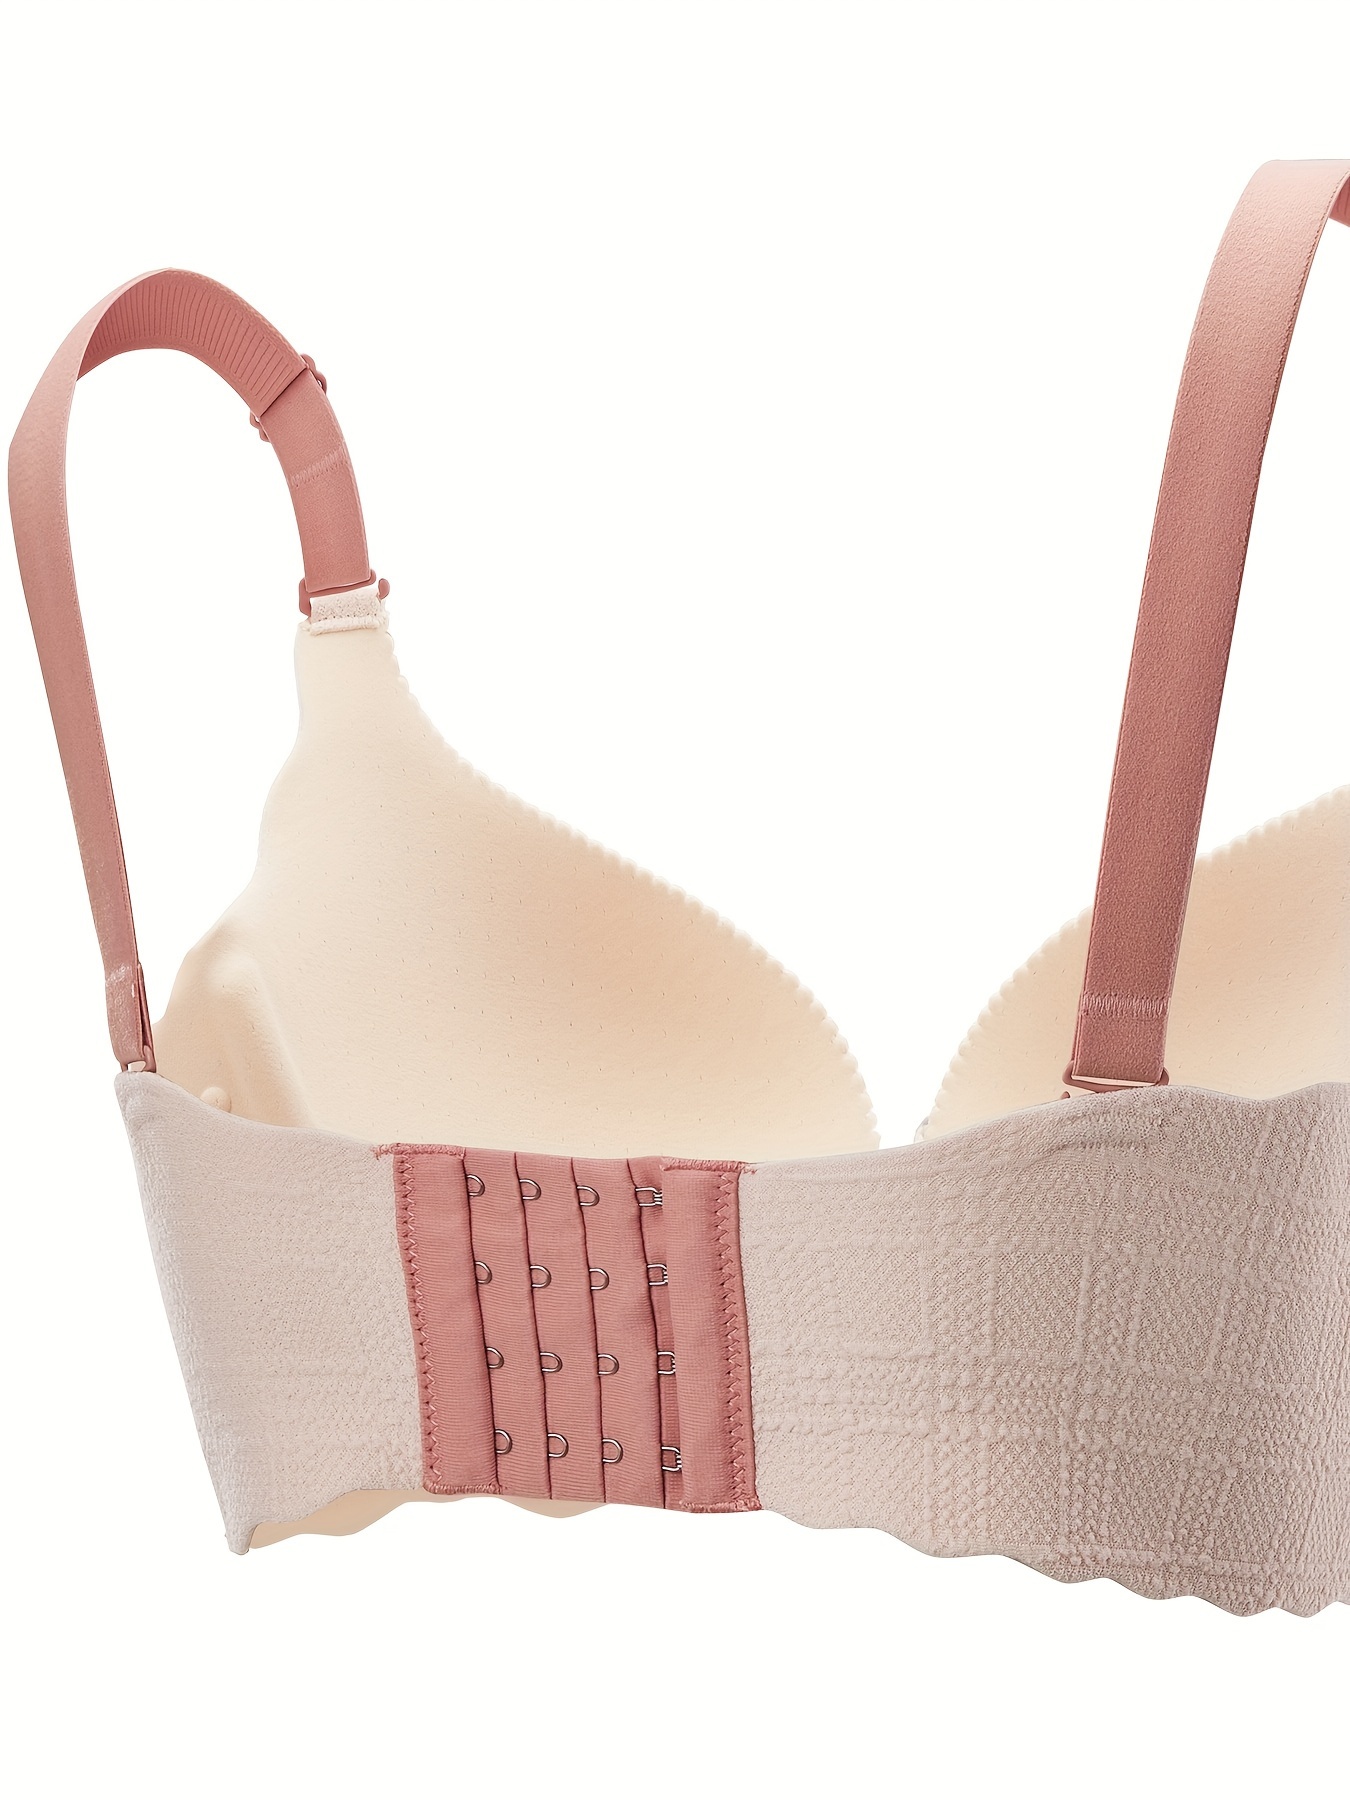 Cloud Soft - Breathable Colored Strap Bra with Vertical Stripes by